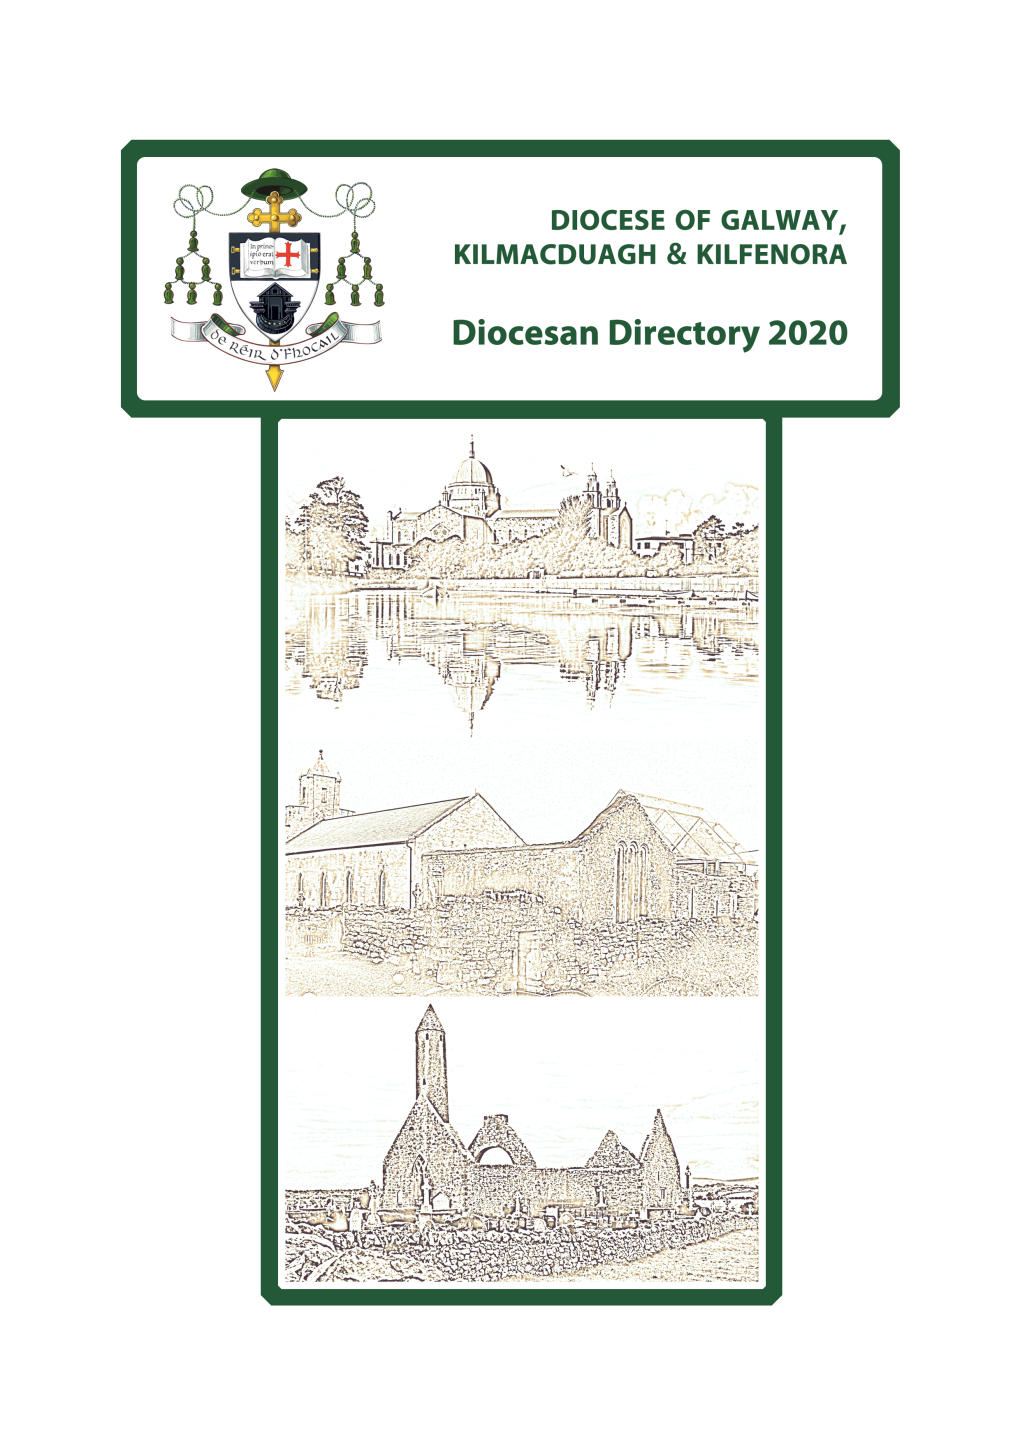 Diocesan Directory 2019 the Diocesan Directory Is Compiled by the Diocesan Office, Diocese of Galway, Kilmacduagh & Kilfenora, the Cathedral, Gaol Road, Galway